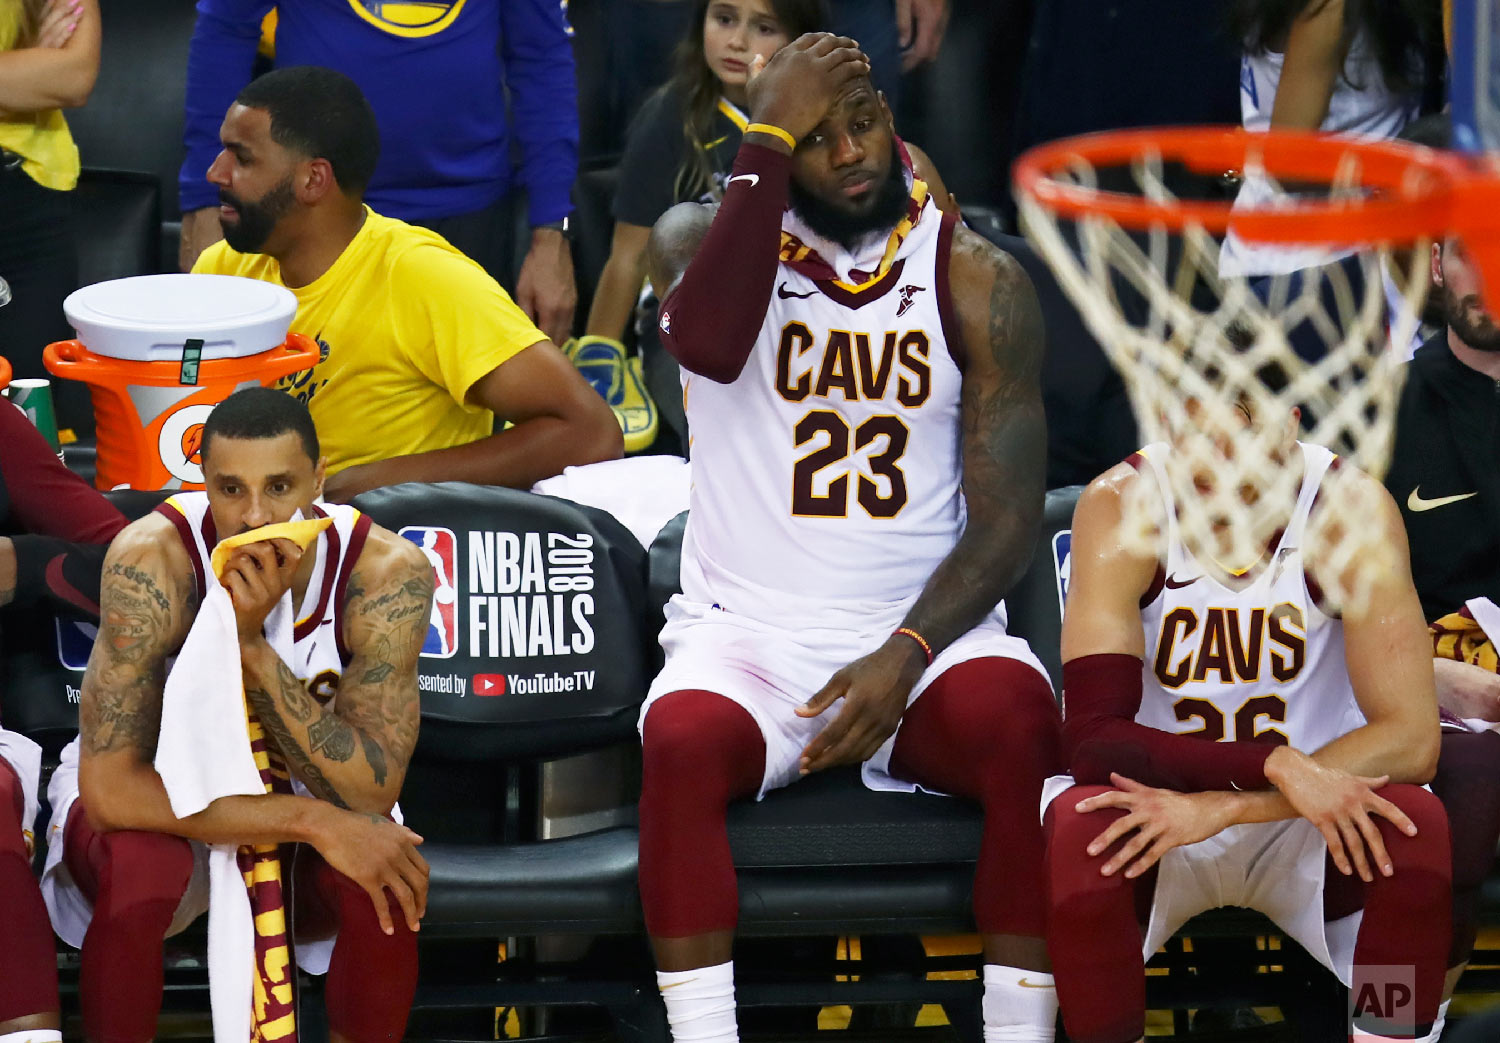  Cleveland Cavaliers forward LeBron James (23) sits on the bench between guards George Hill, left, and Kyle Korver during the second half of Game 2 of basketball's NBA Finals against the Golden State Warriors in Oakland, Calif., on June 3, 2018. The 